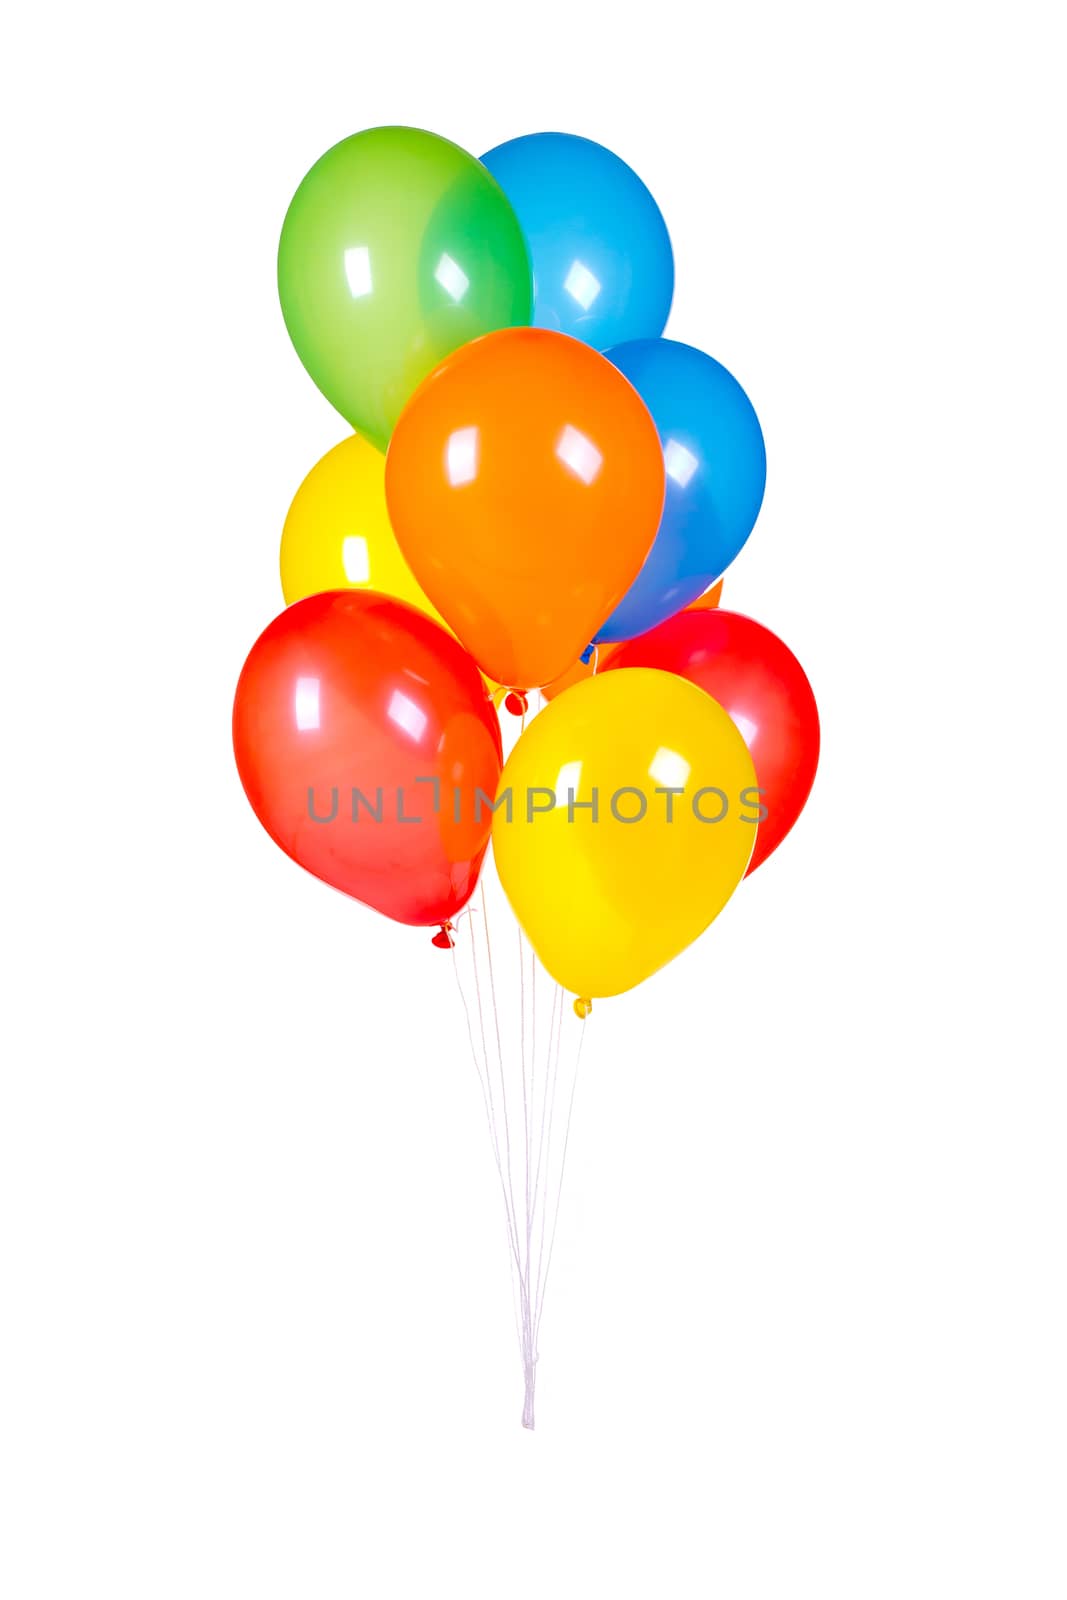 lot of colorful balloons